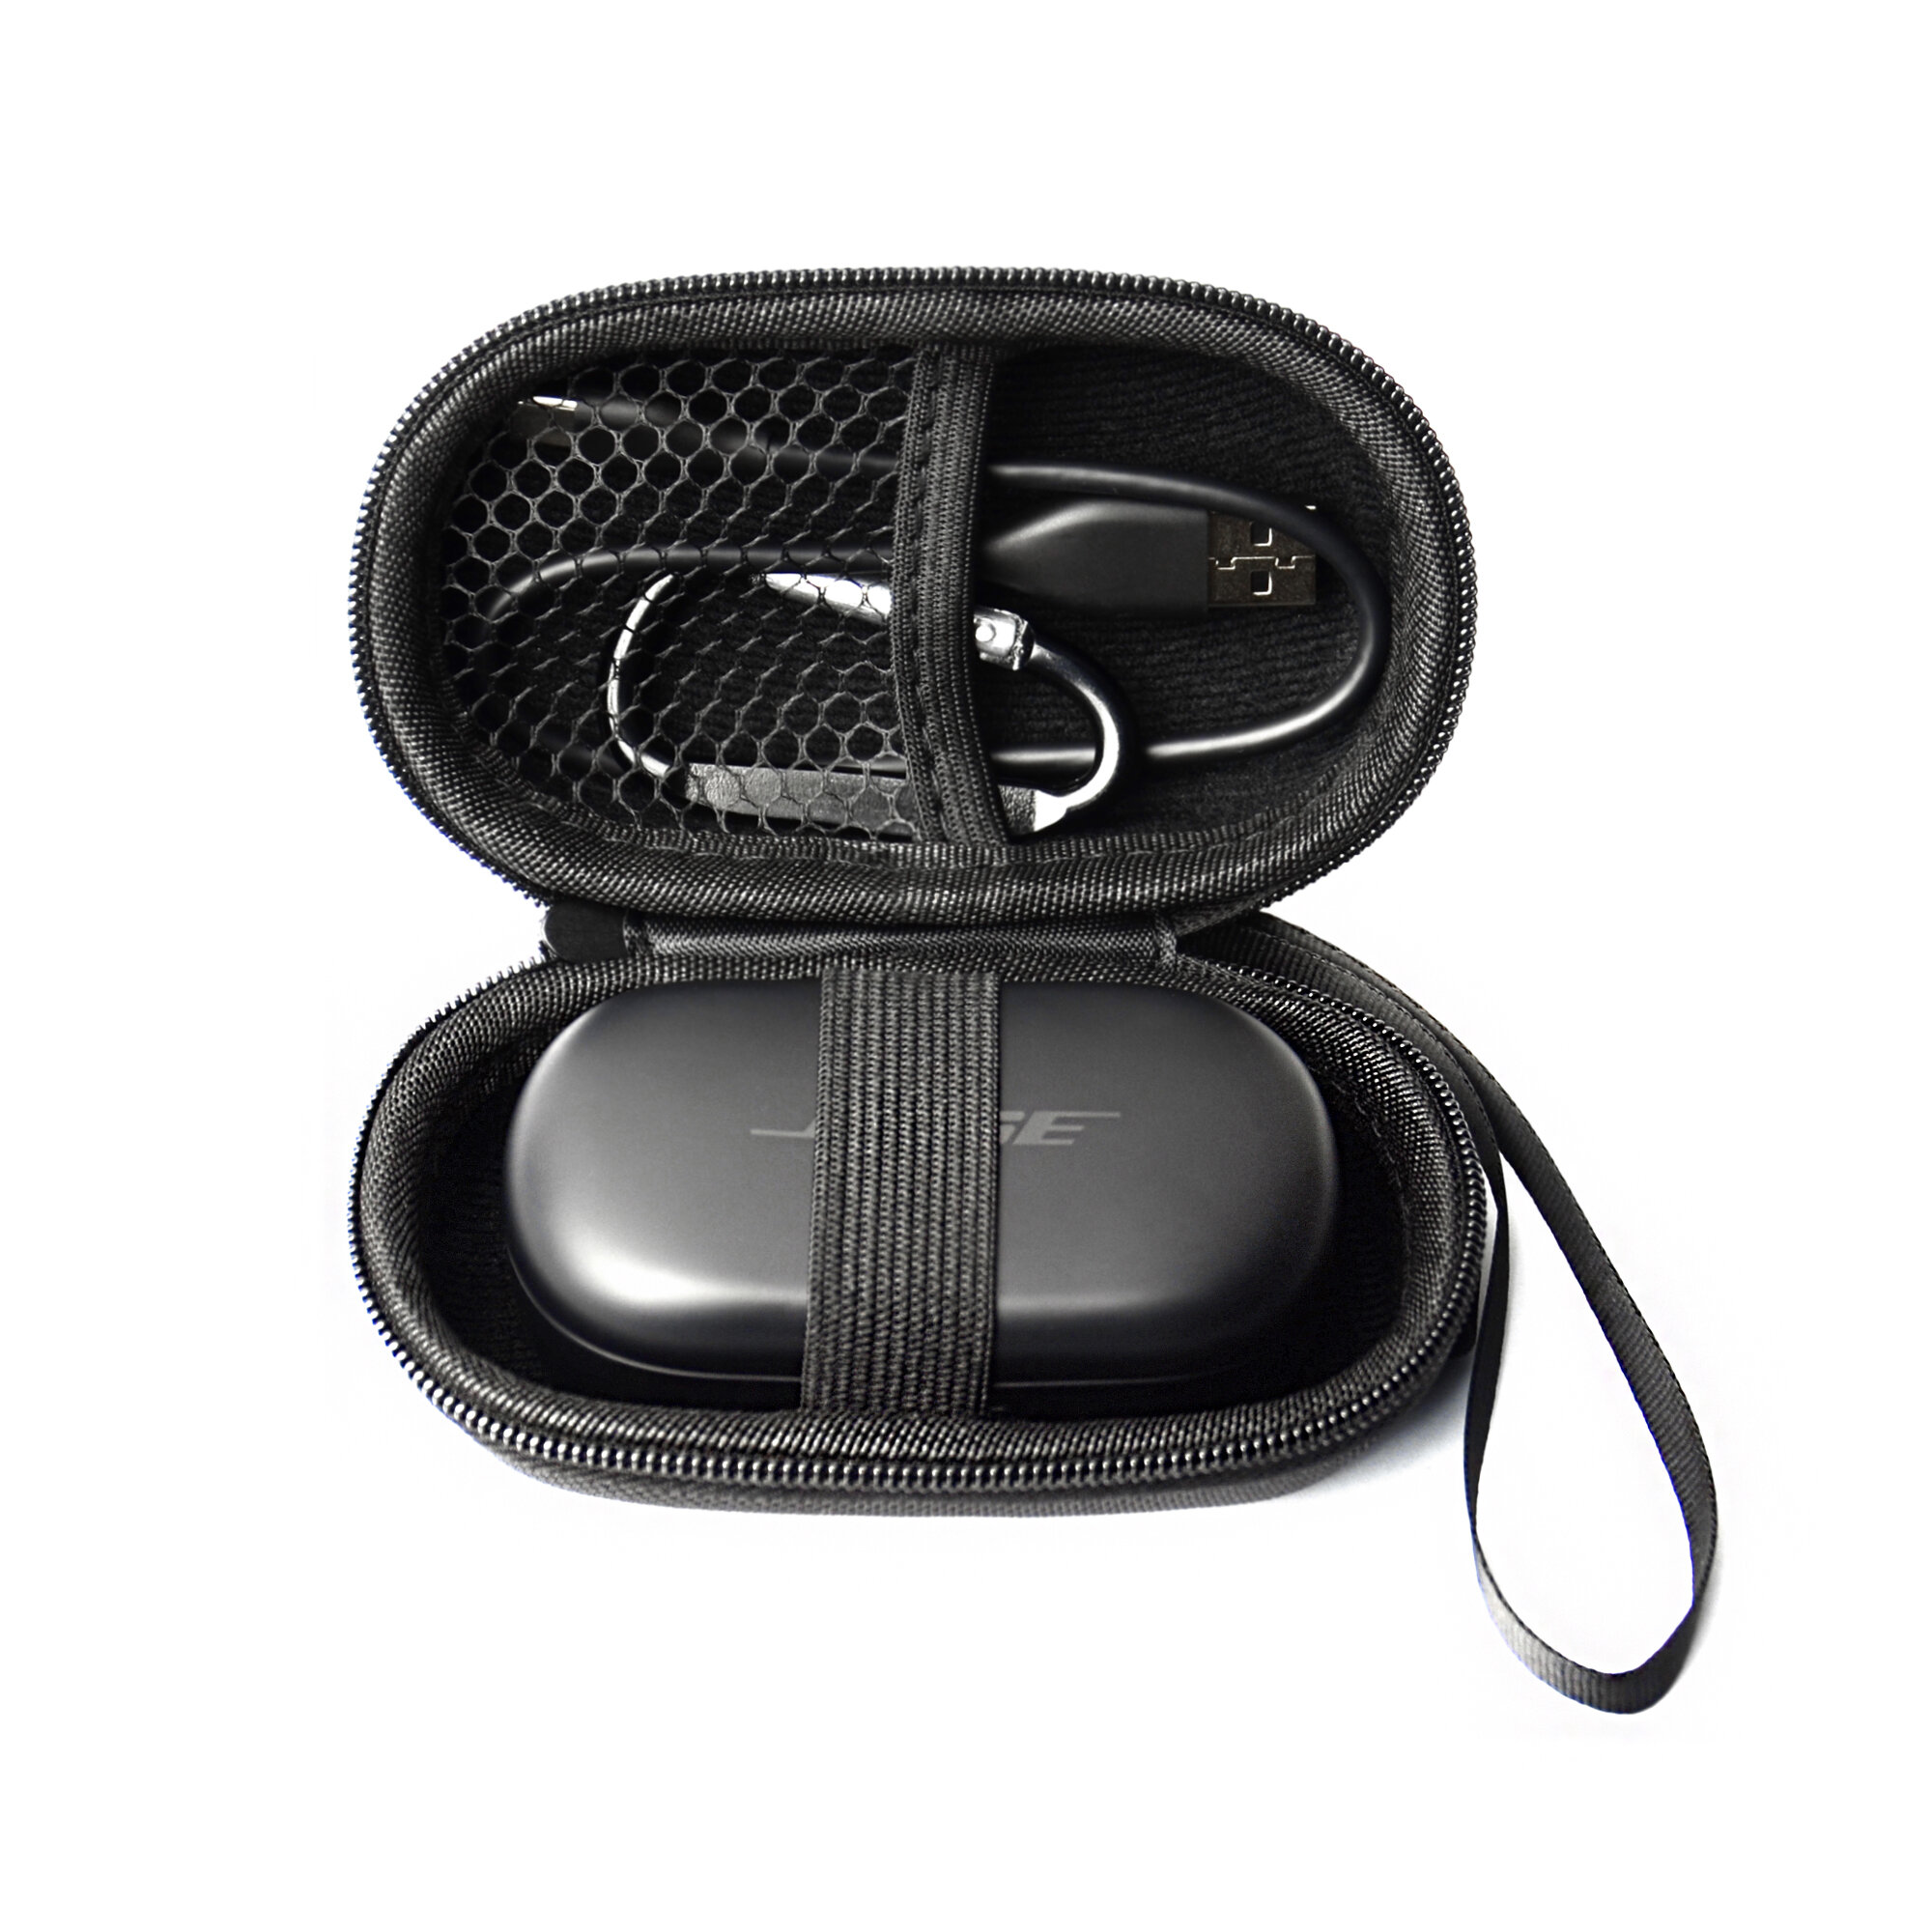 Bakeey Headphone Protective Case Box for QuietComfort Protective Case with Carabiner Storage Bag